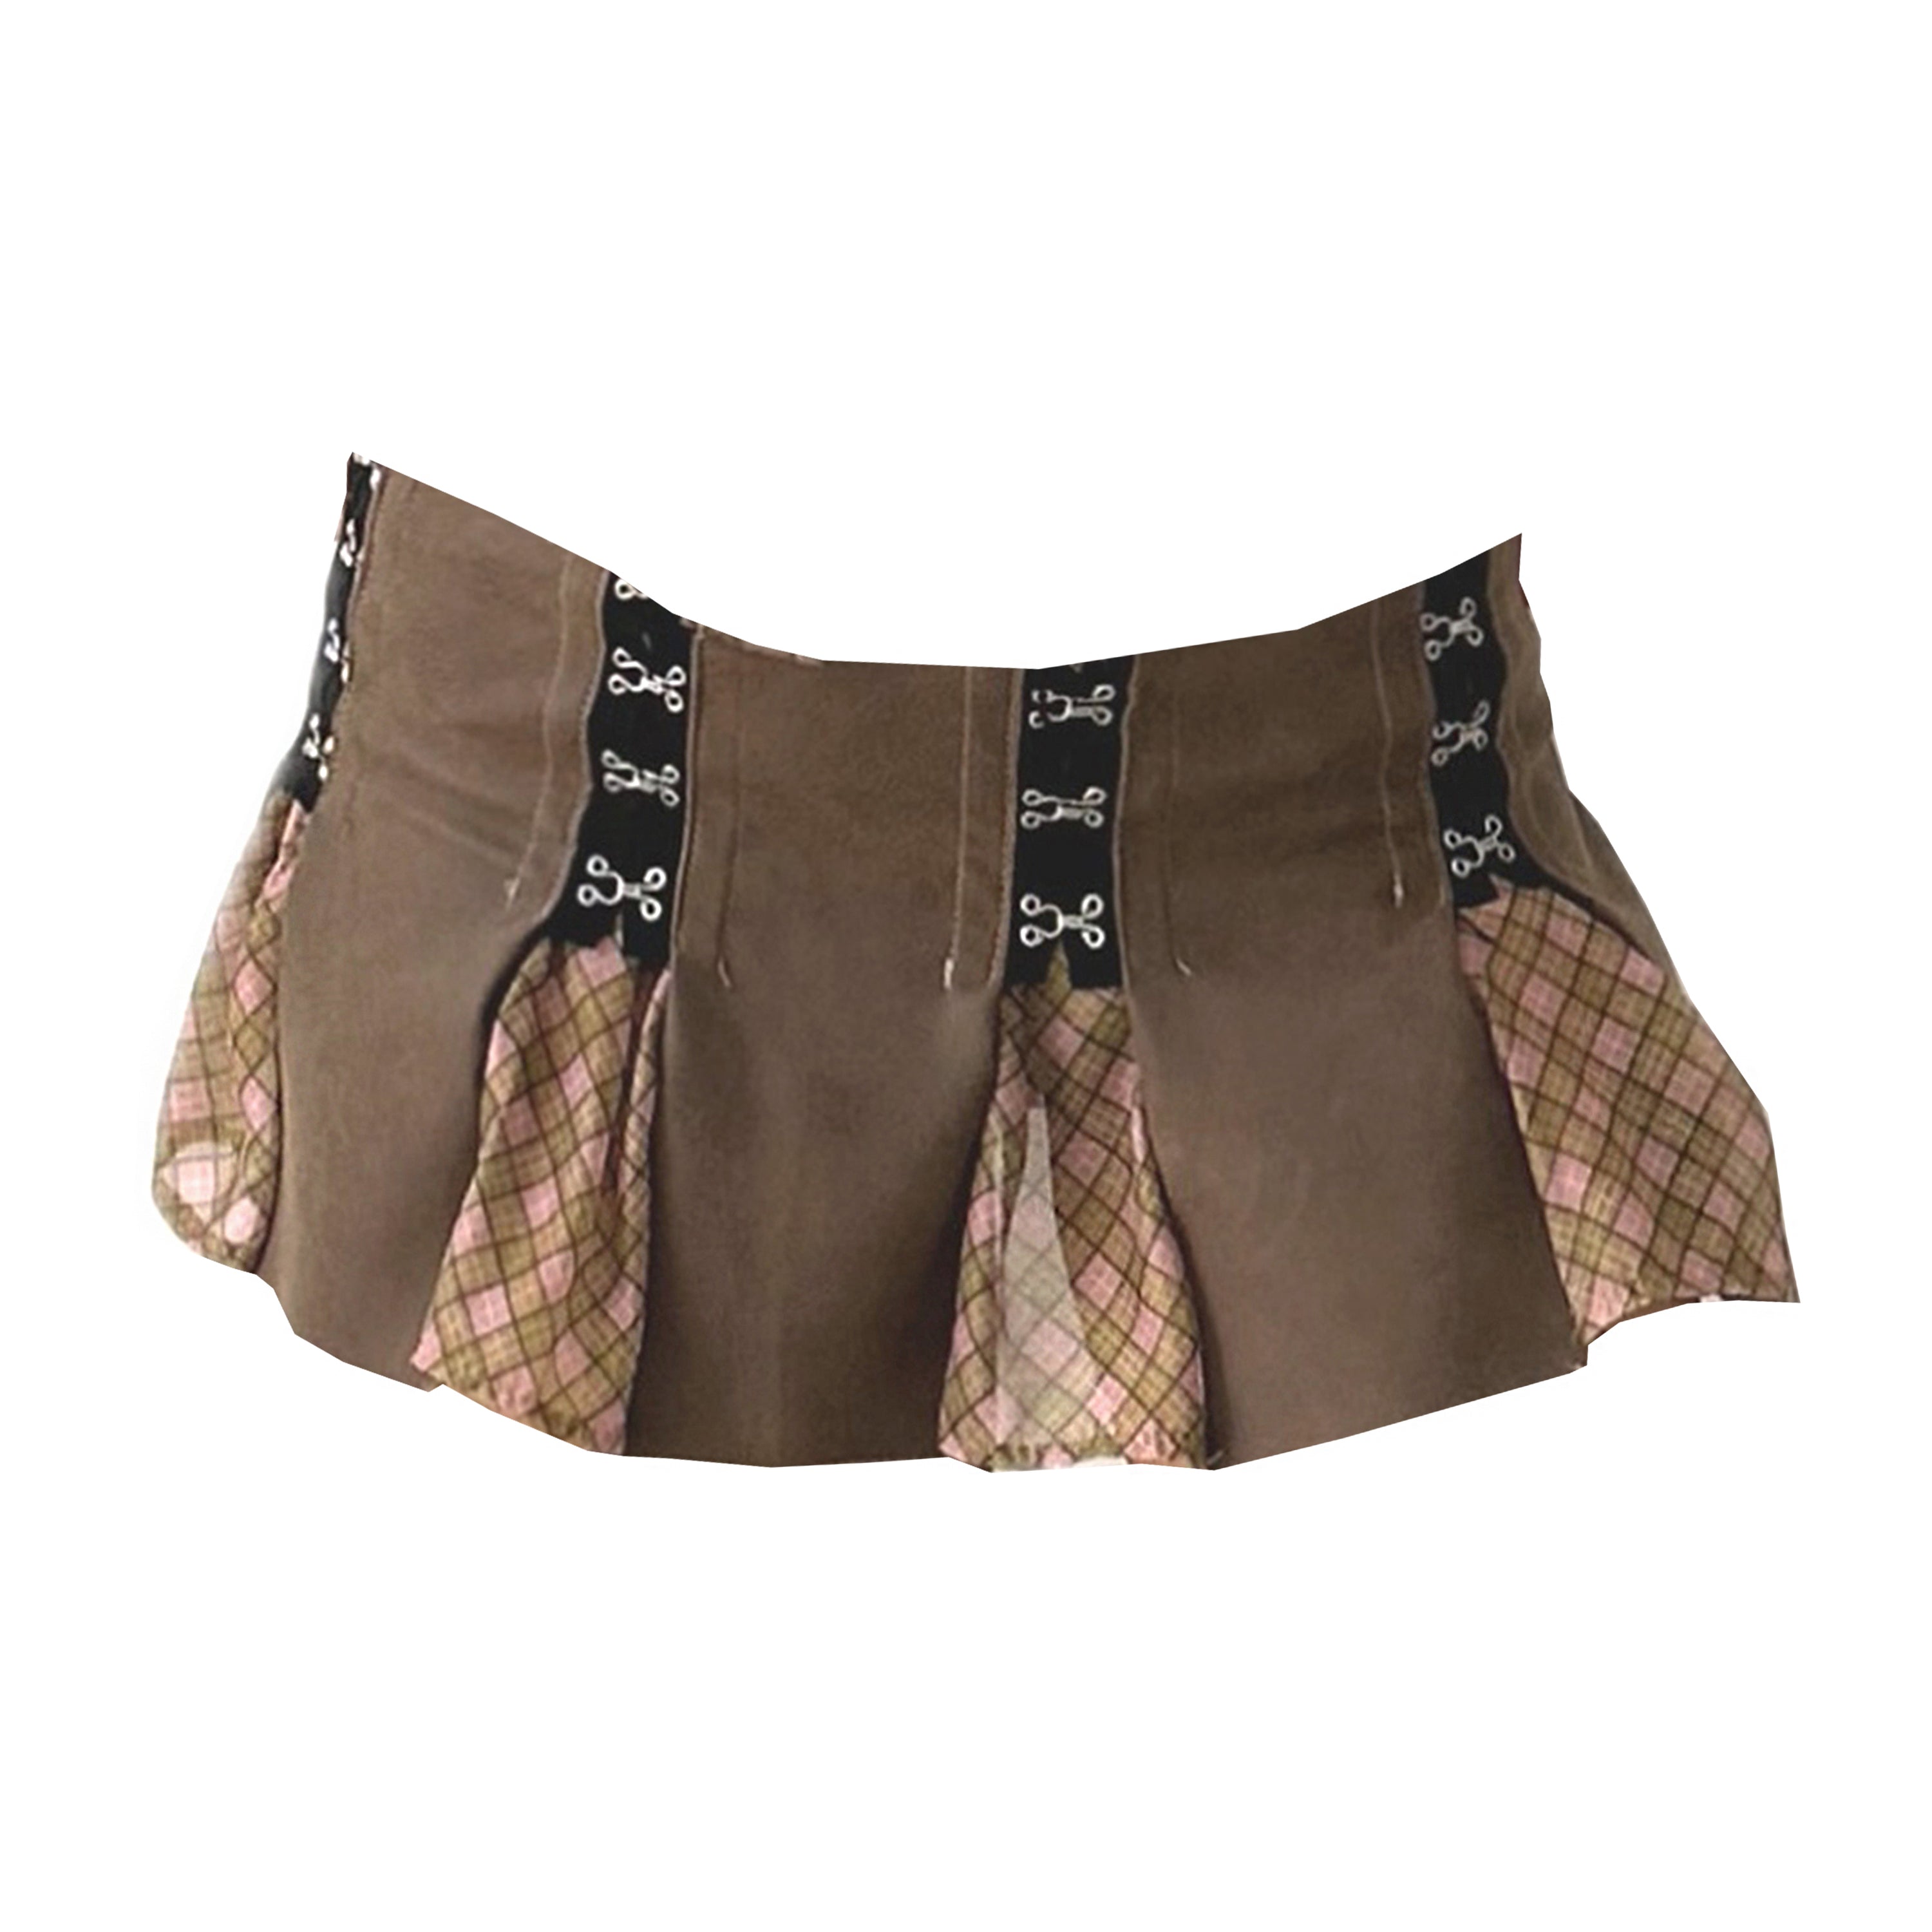 Vegan Leather Plaid Organza Patched Mini Skirt